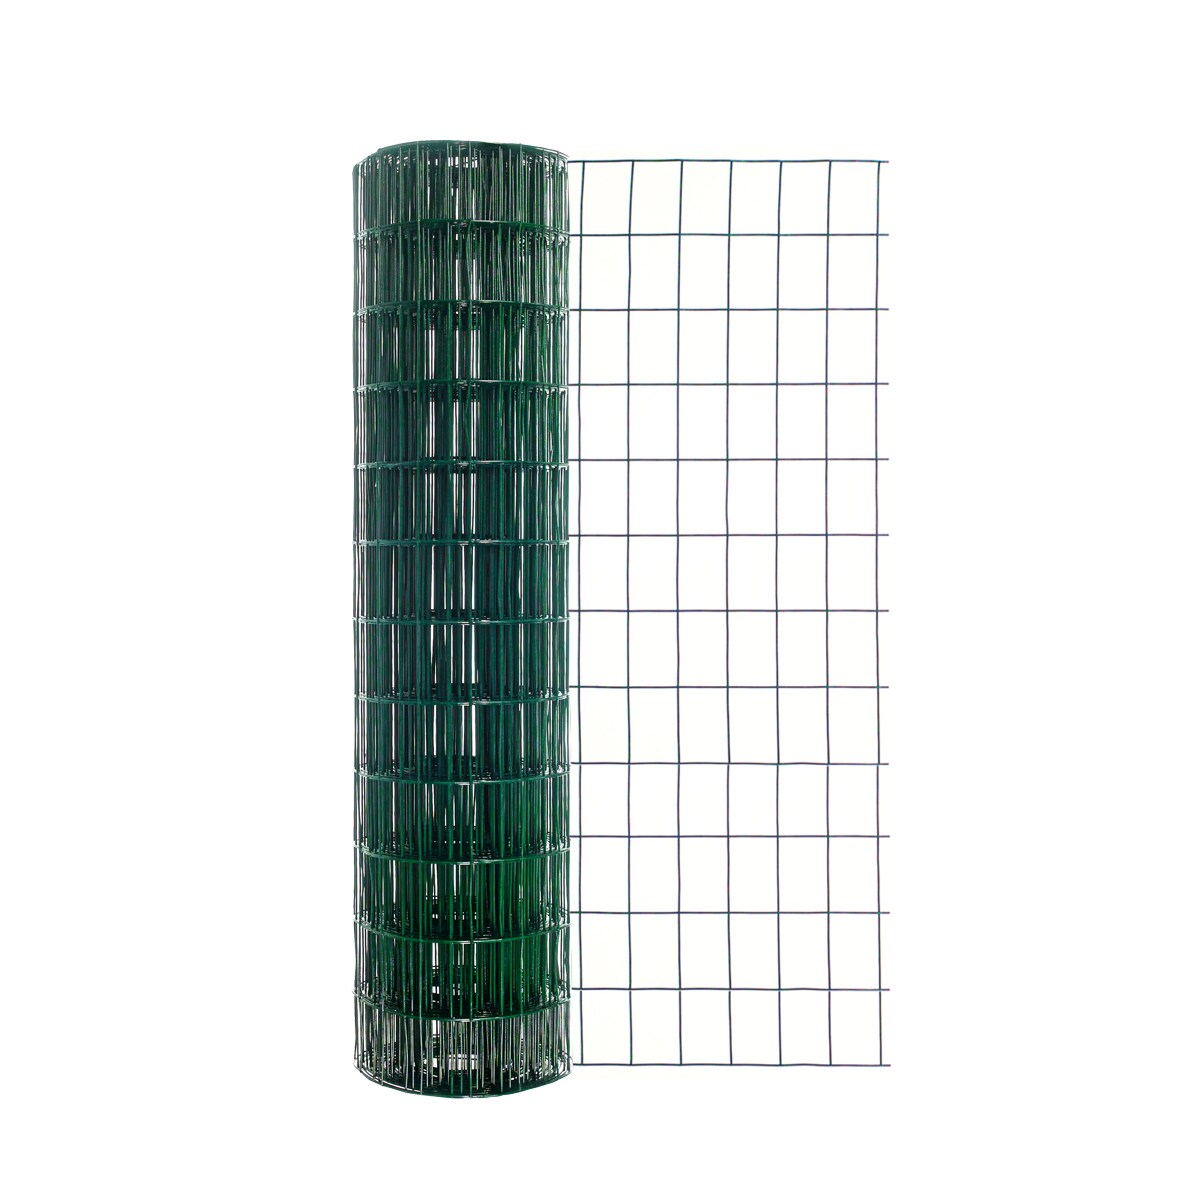 GREEN AVIARY WIRE MESH FENCE CHICKEN GARDEN PVC COATED WIRE HUTCH BORDER PANEL 